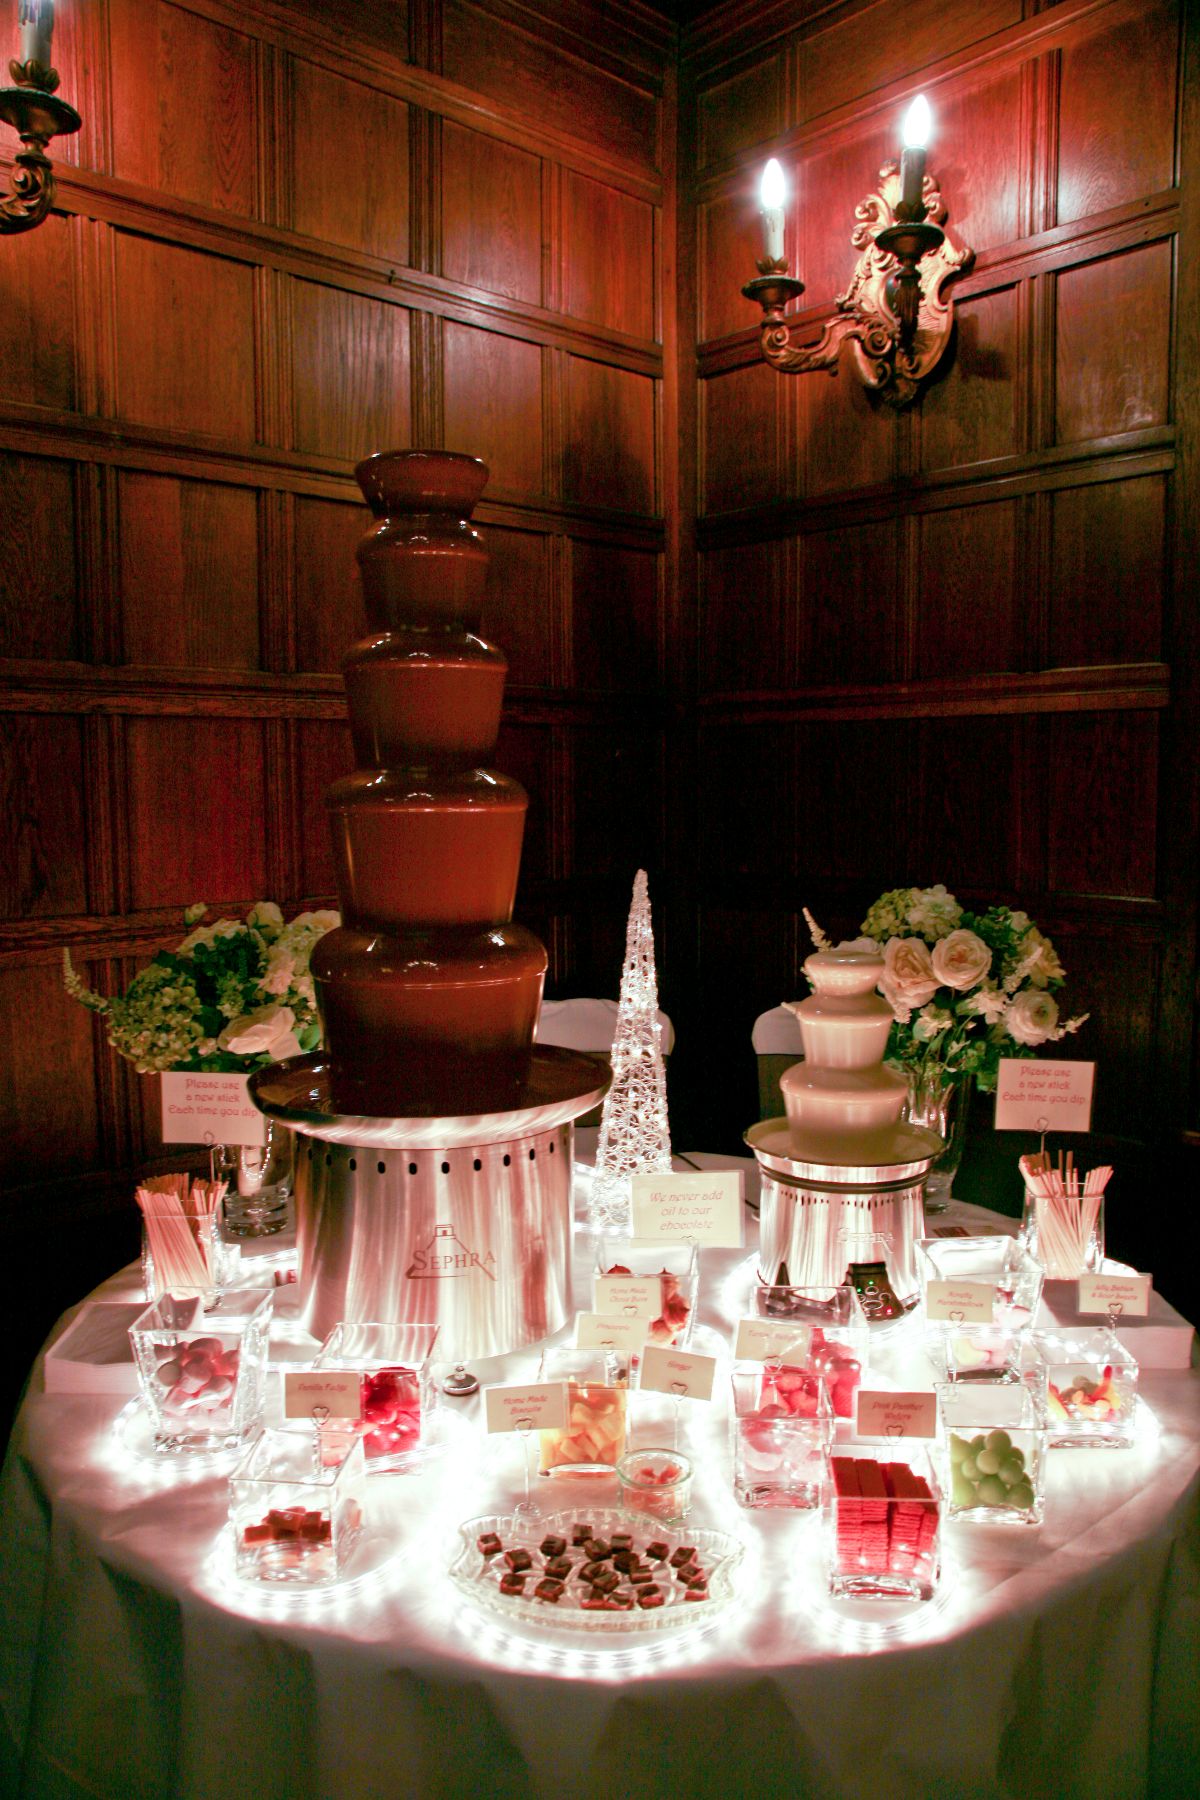 Chocolate Fountains of Dorset-Image-15